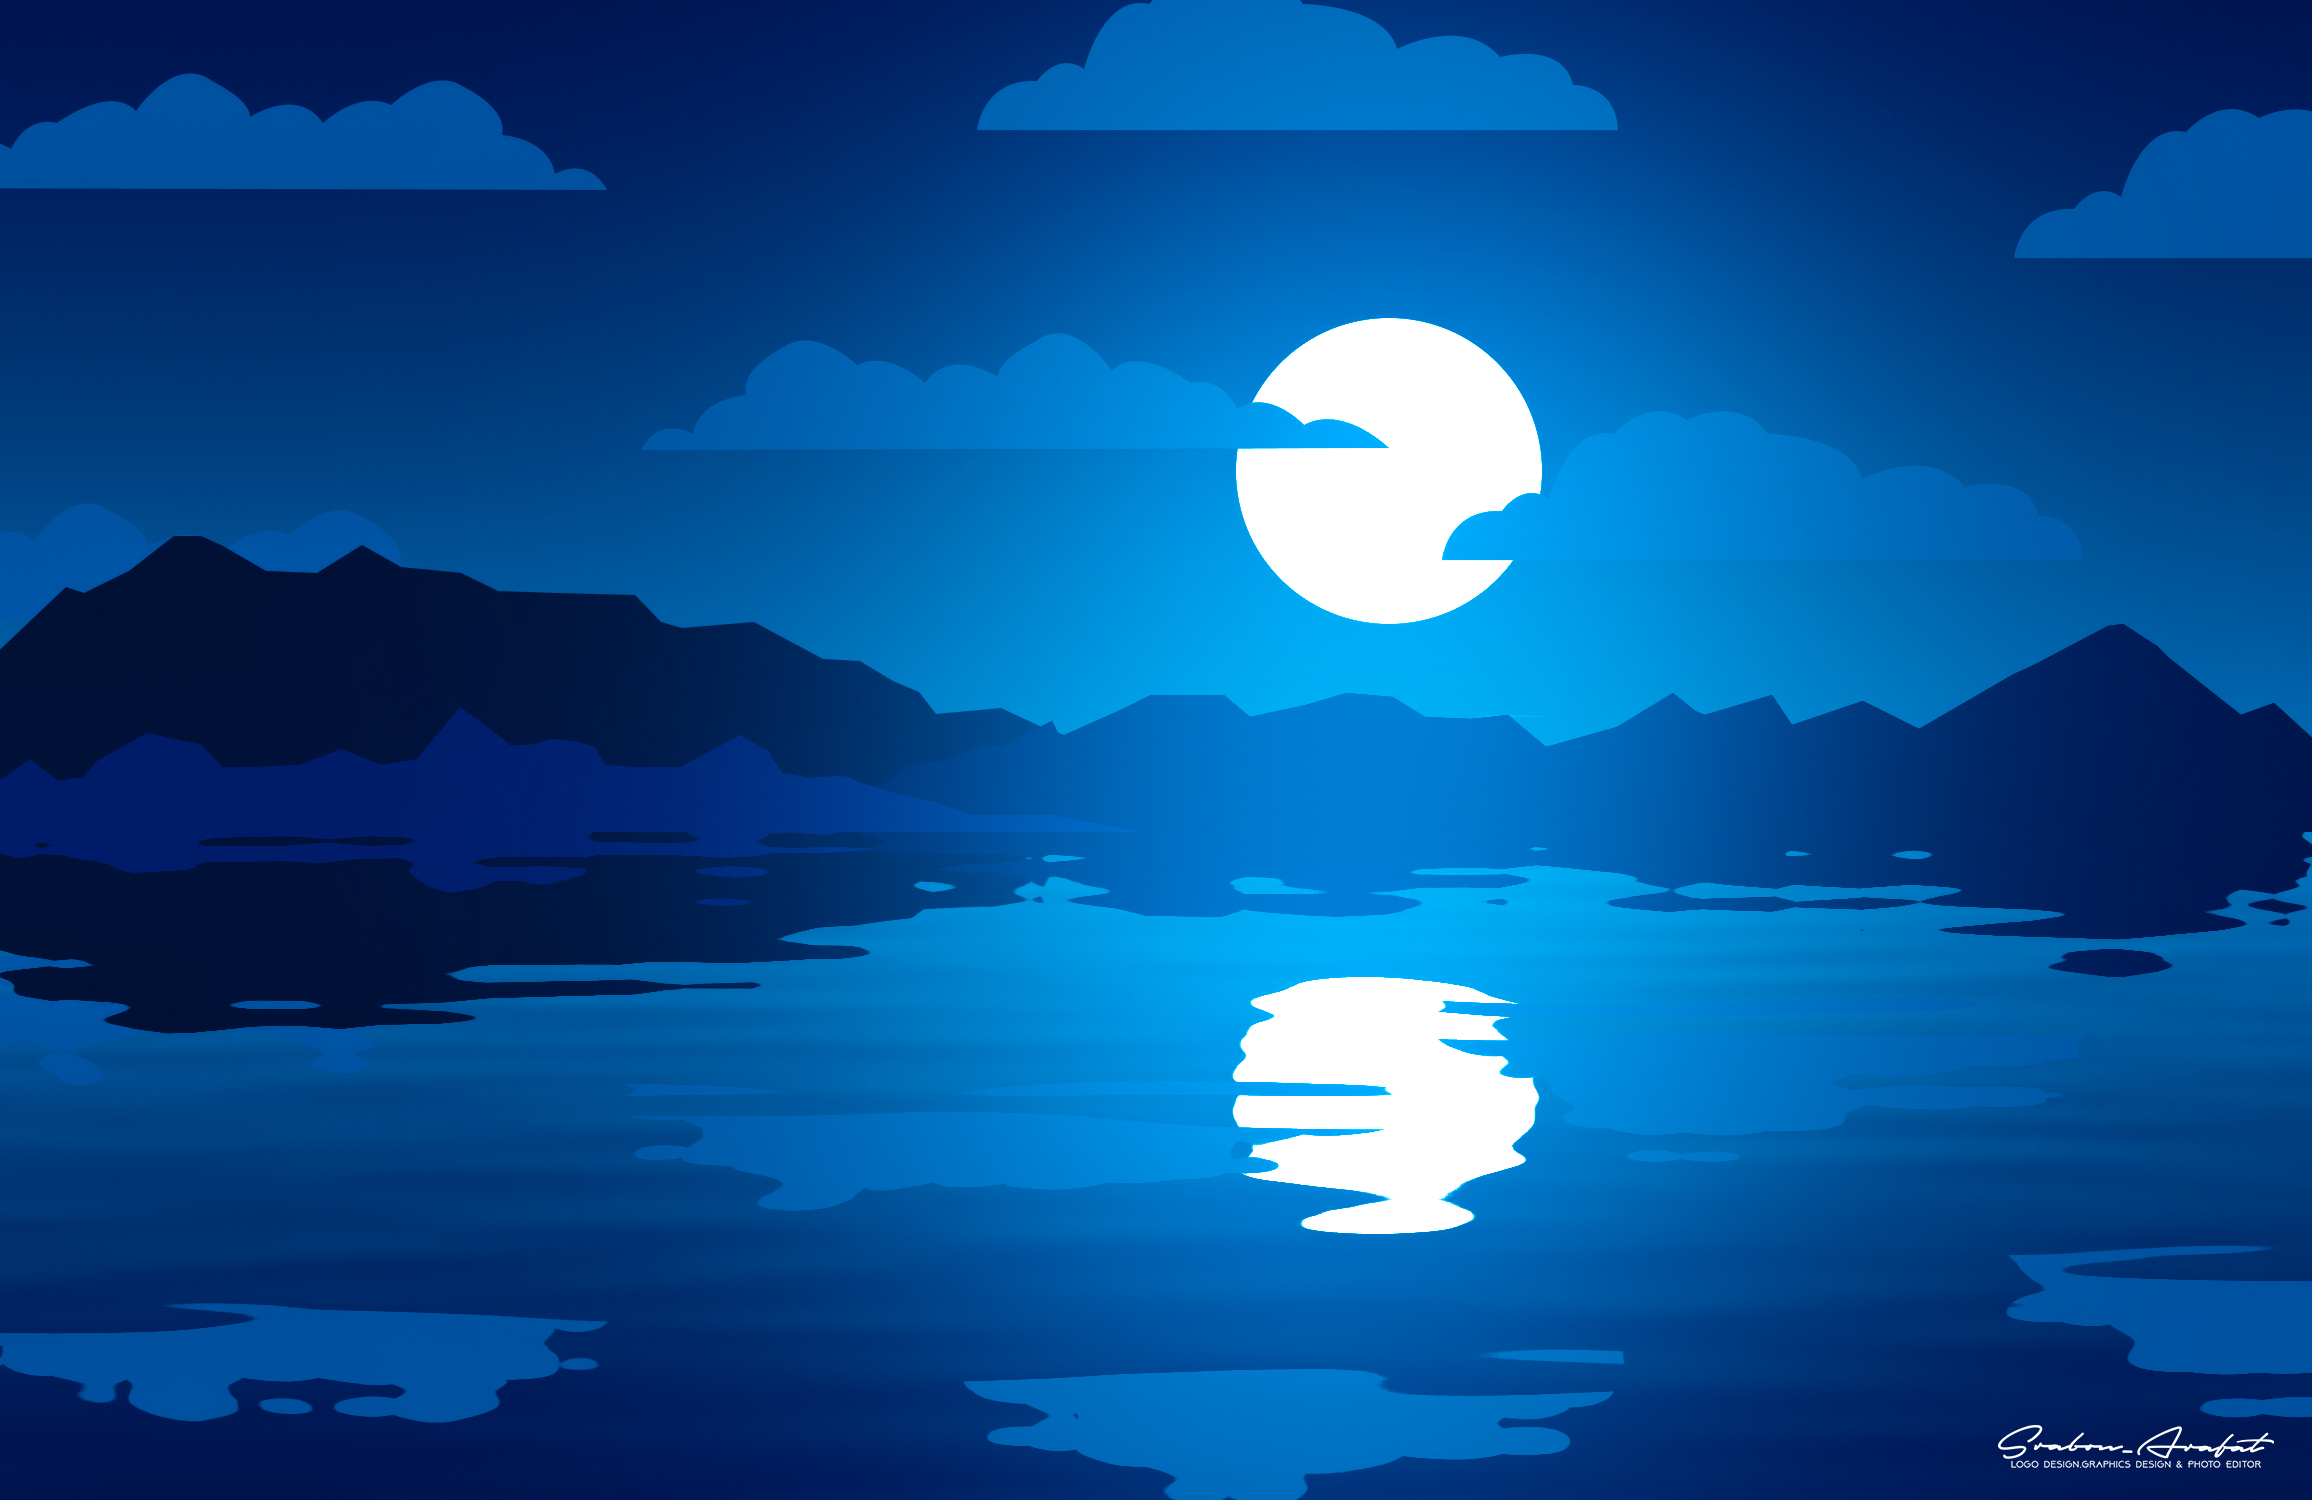 Minimalistic landscape with a lake under the full moon